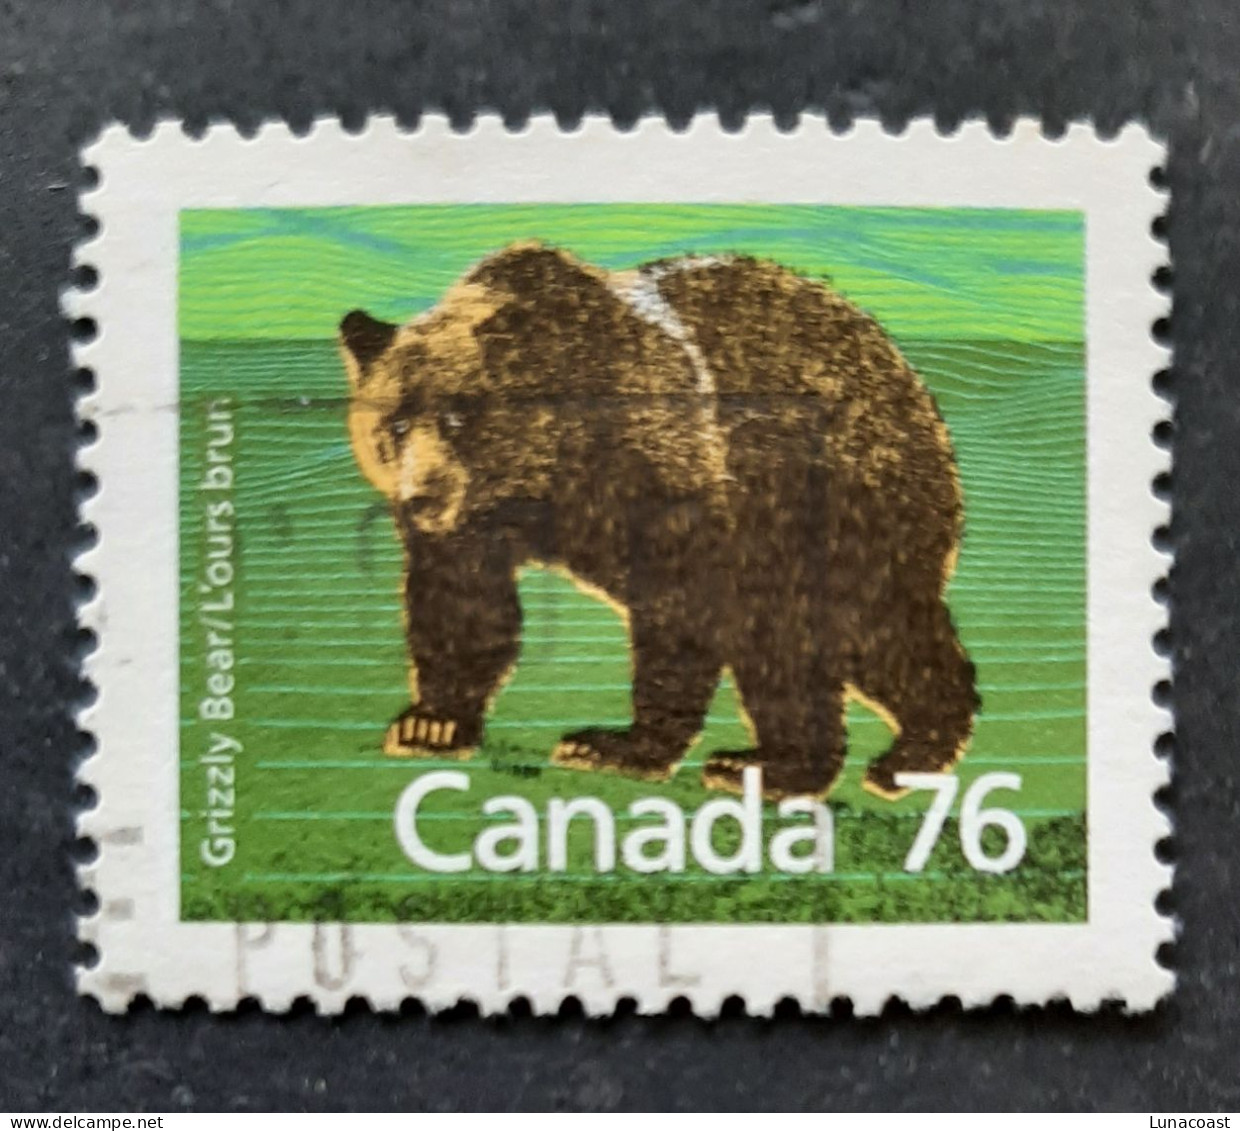 Canada 1989  USED  Sc1178a,   PERF. 12.5 X 13.1,  76c Grizzly Bear, - Usati